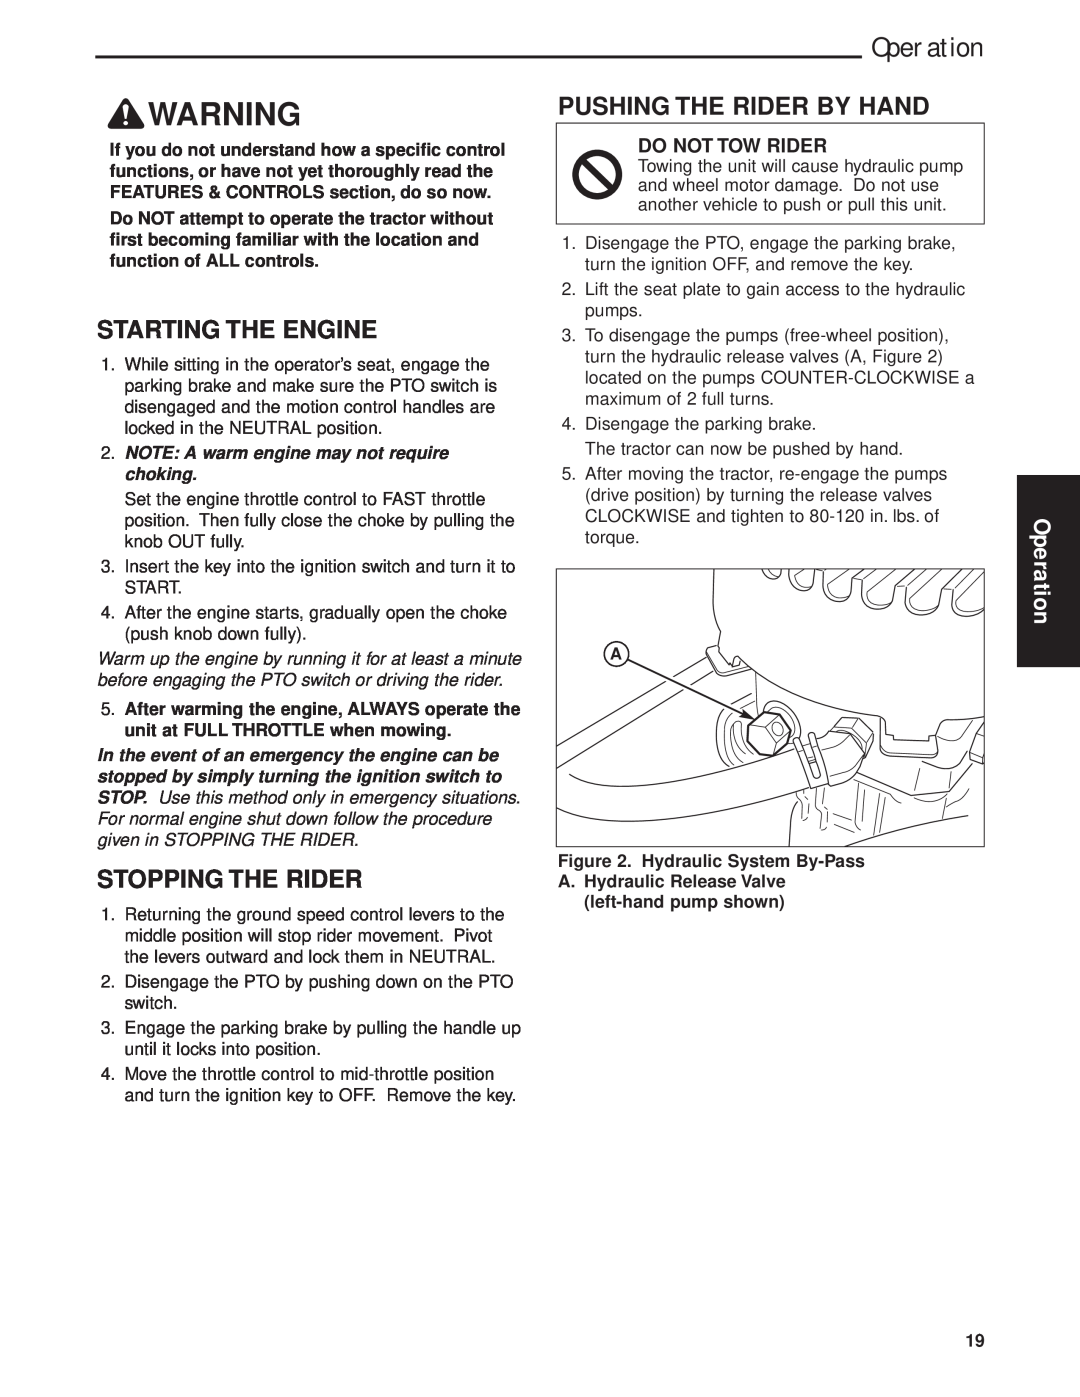 Briggs & Stratton 5900625 Starting The Engine, Stopping The Rider, Pushing The Rider By Hand, Operation, Do Not Tow Rider 